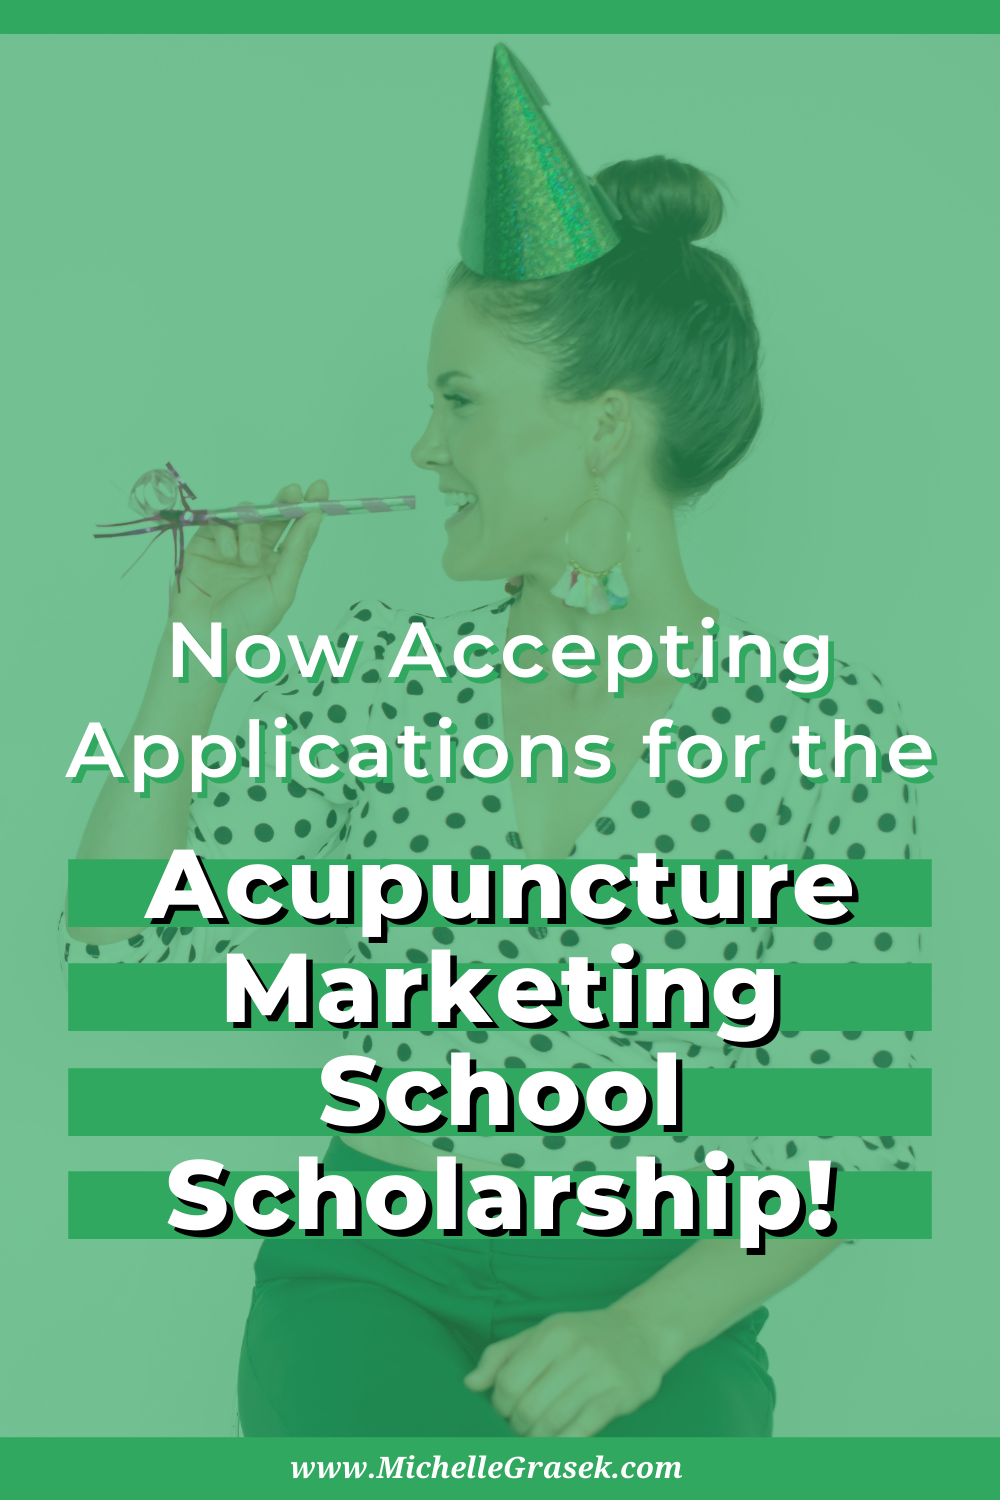 This article covers instructions for how to submit your scholarship application for Acupuncture Marketing School